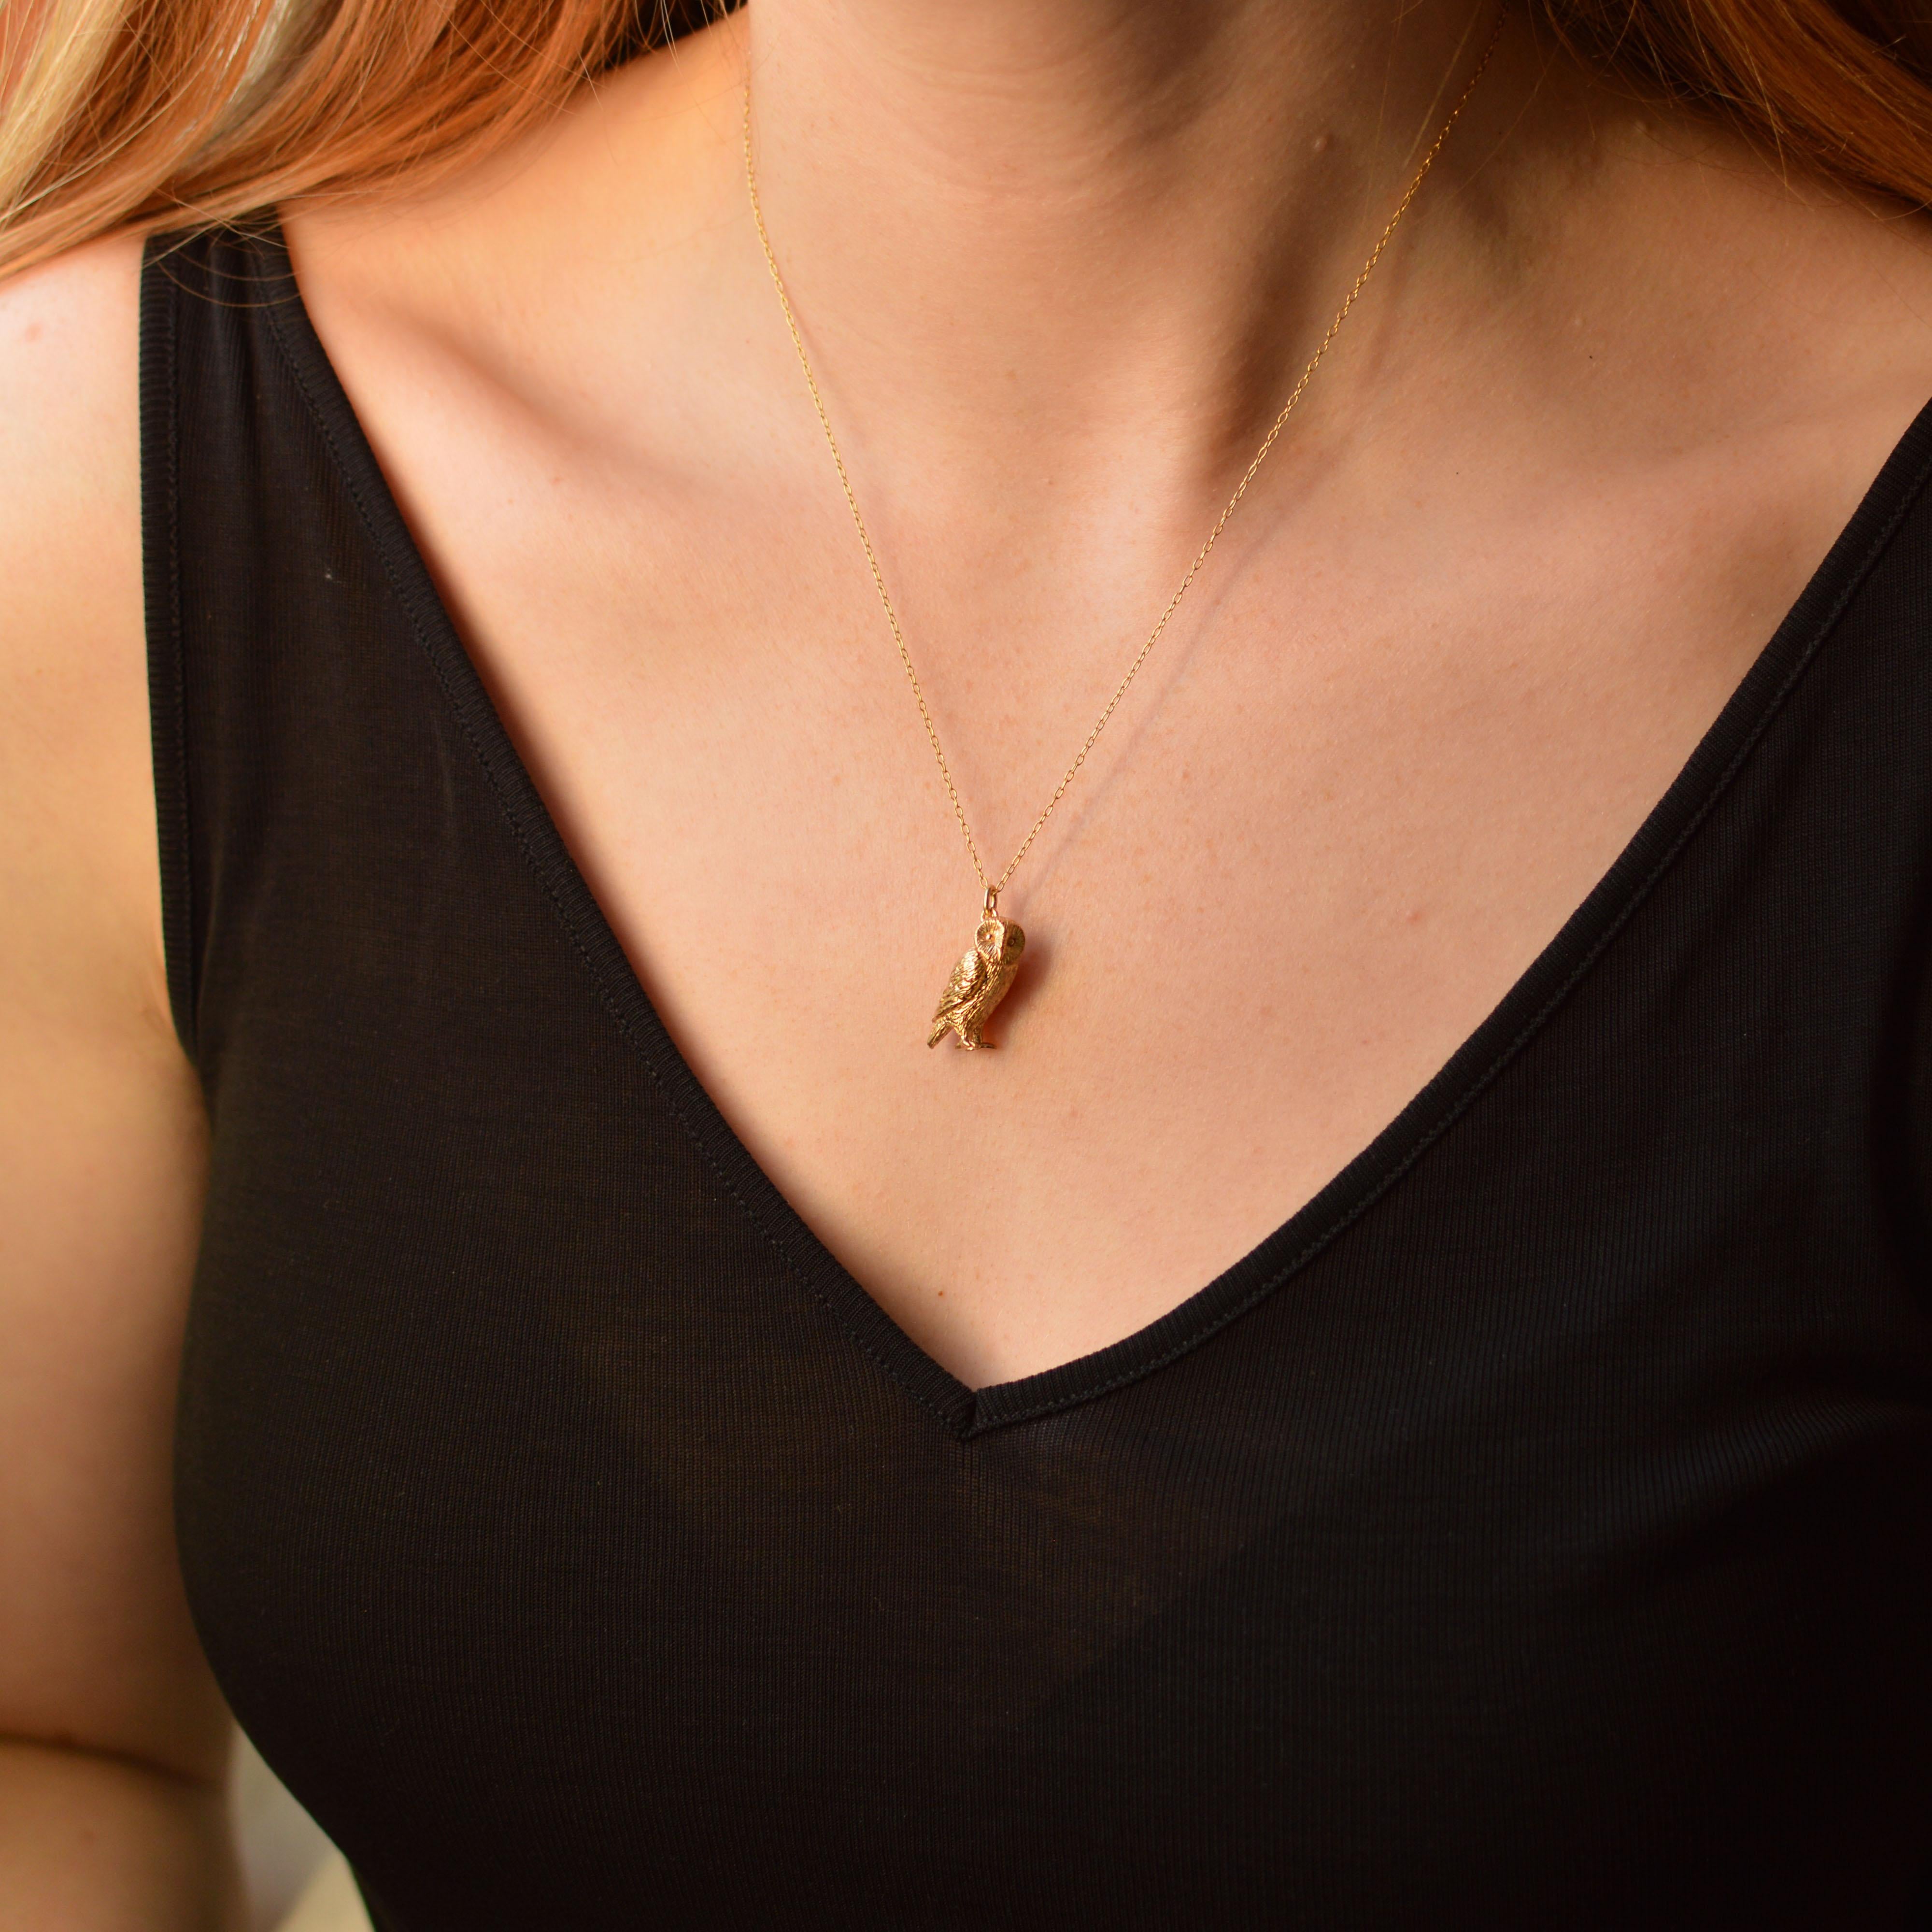 This wise barn owl pendant is cast in solid 18 Carat gold and finished by hand, and is created from Lucy's original hand-sculpted design. 

This owl pendant is made in London, United Kingdom using recycled or Fairtrade Gold. Metals are sourced from